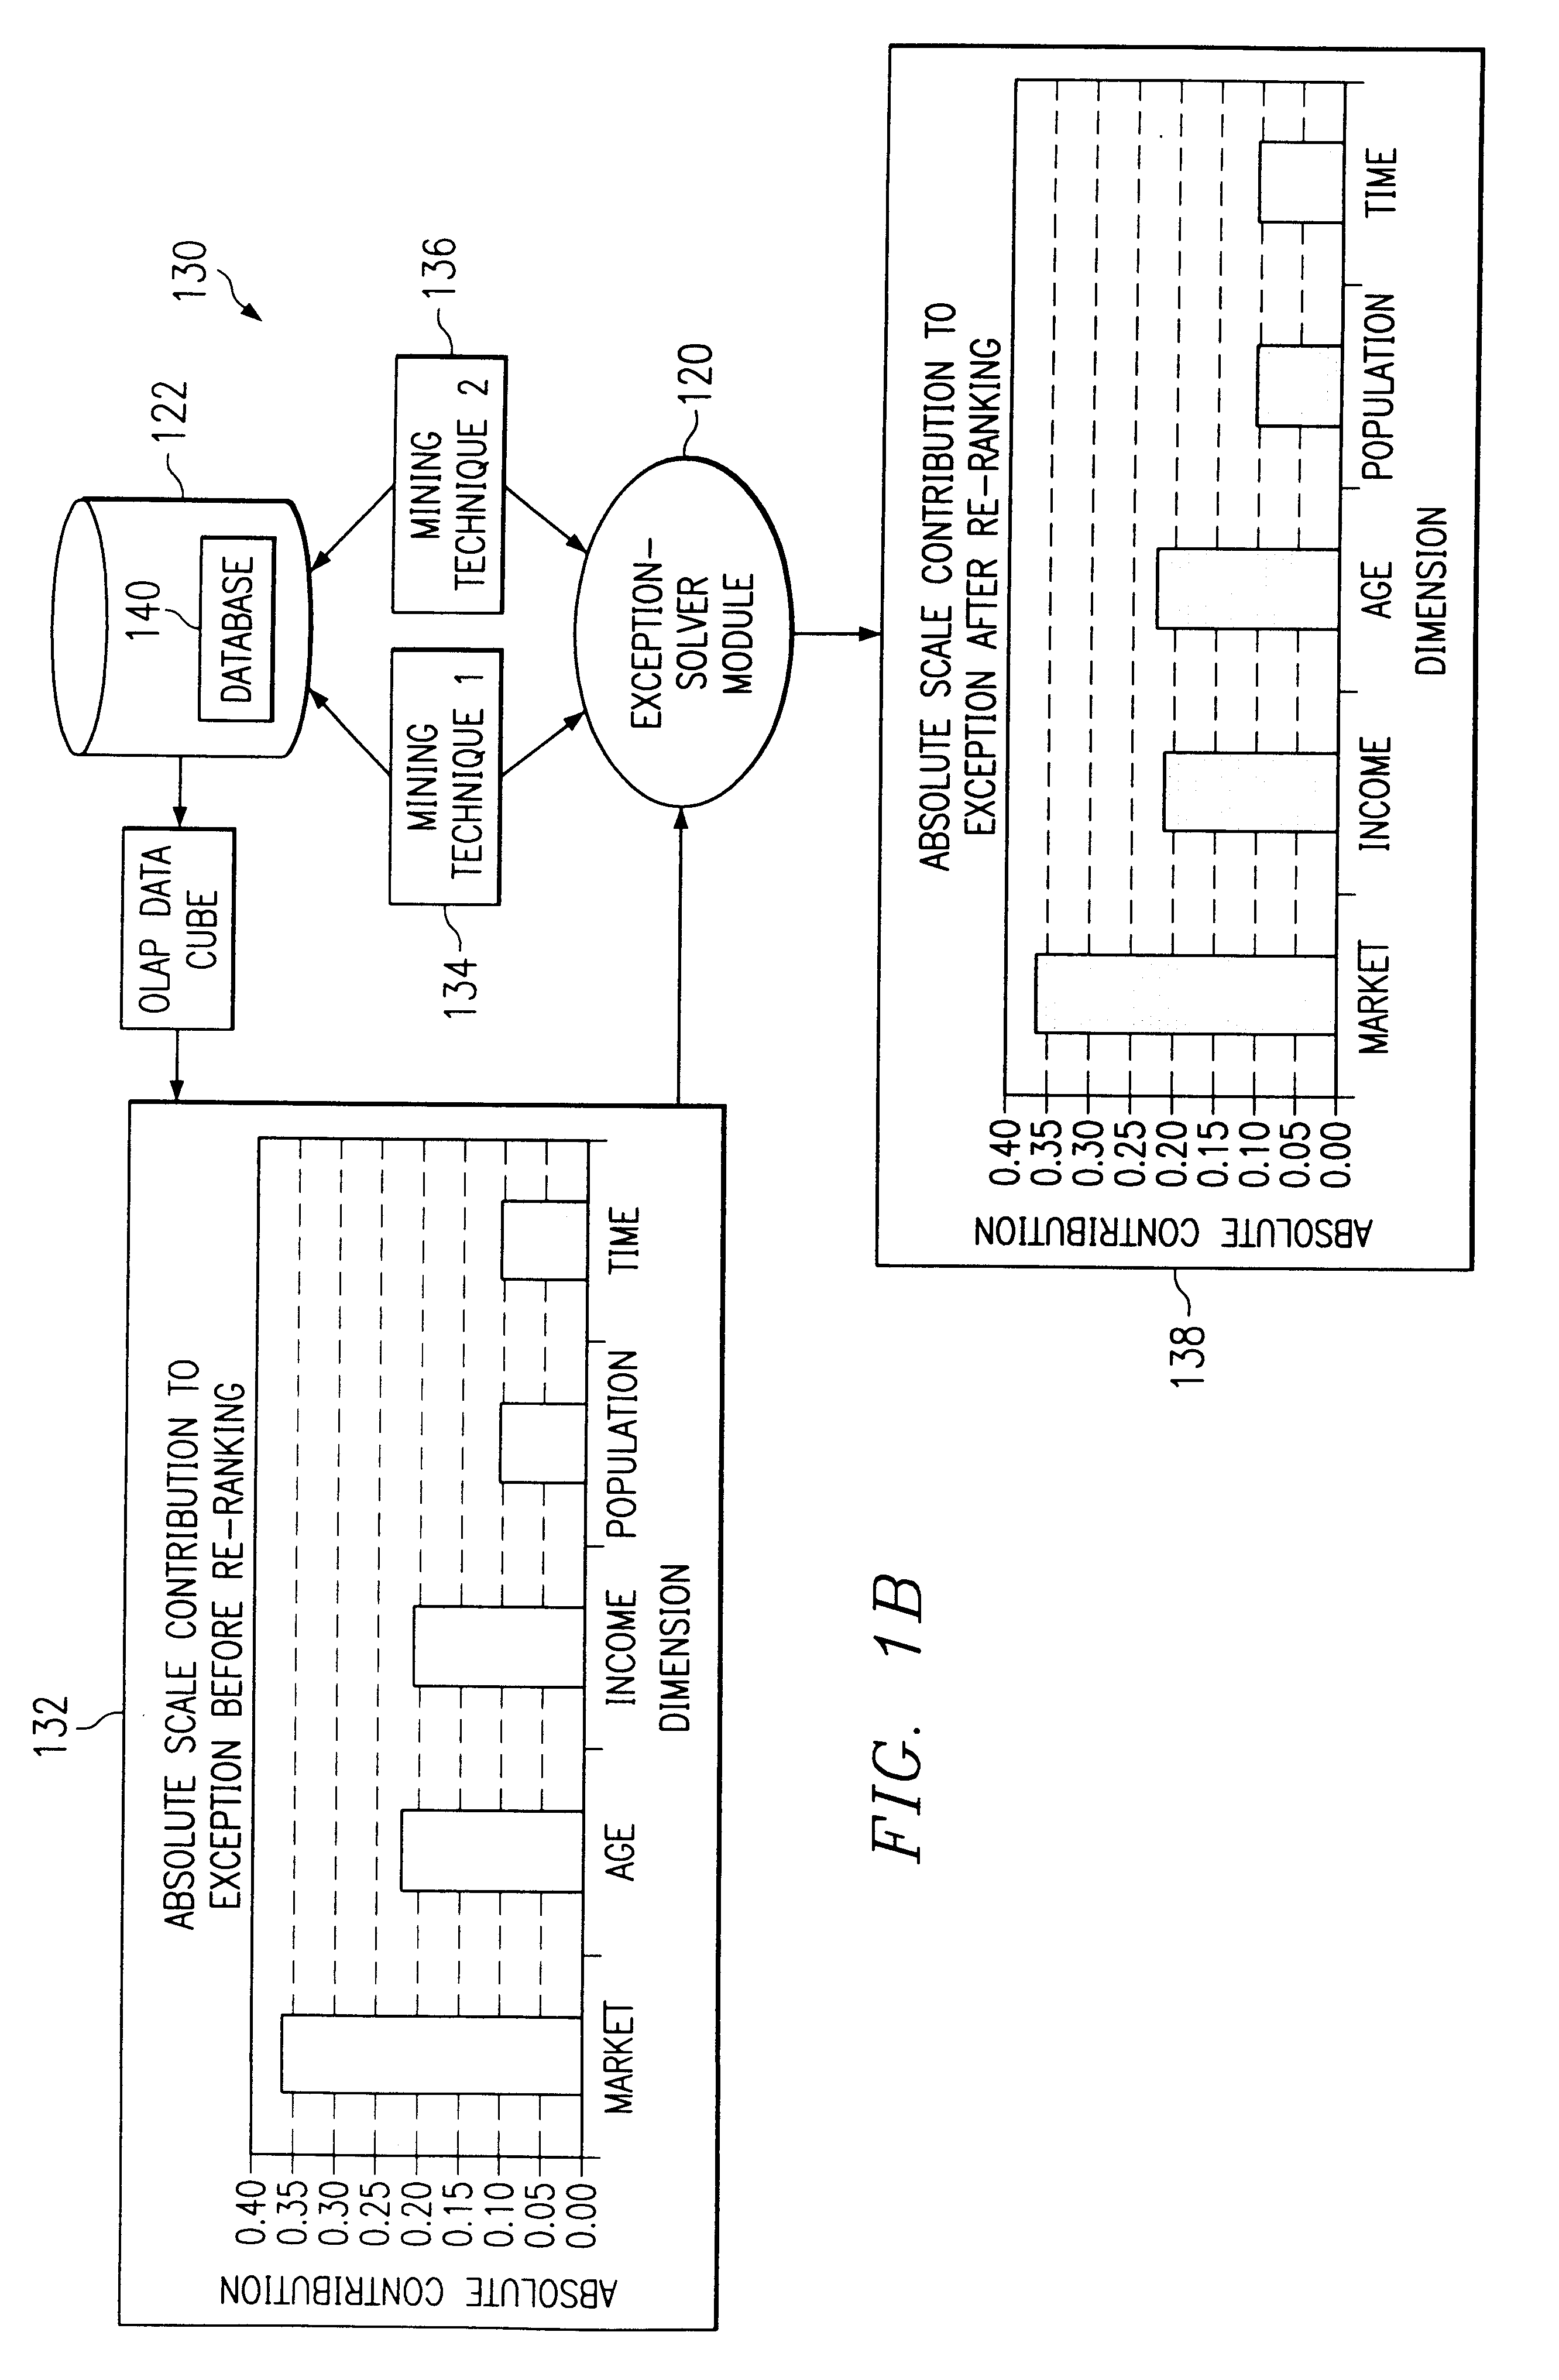 Systems, methods, and computer program products to rank and explain dimensions associated with exceptions in multidimensional data